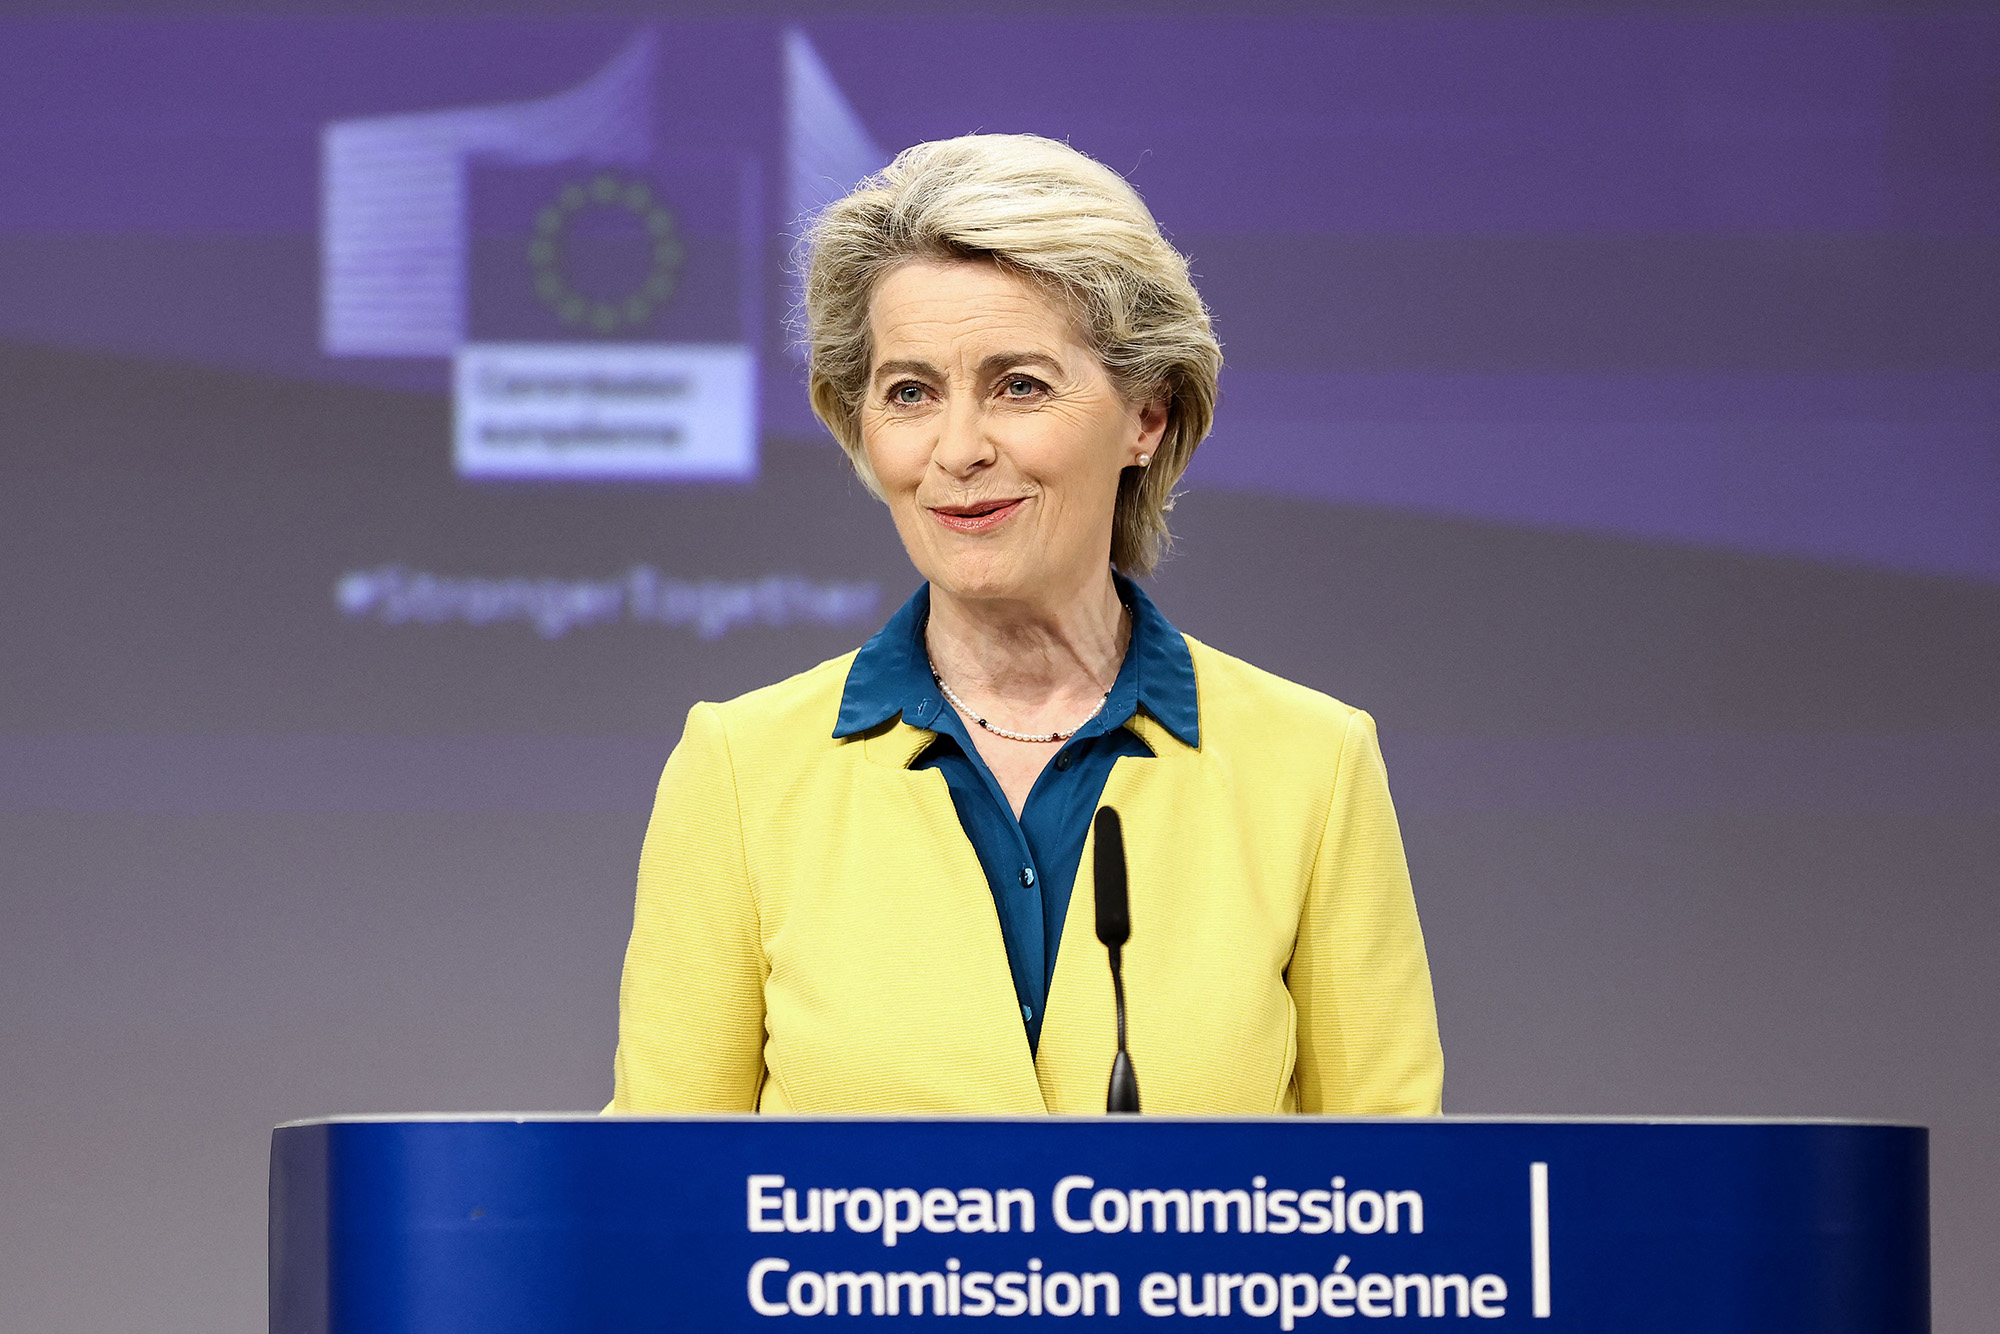 European Commission President Ursula von der Leyen holds a press conference on the EU membership applications by Ukraine, Moldova and Georgia at the European Commission headquarters in Brussels, Belgium, on June 17.